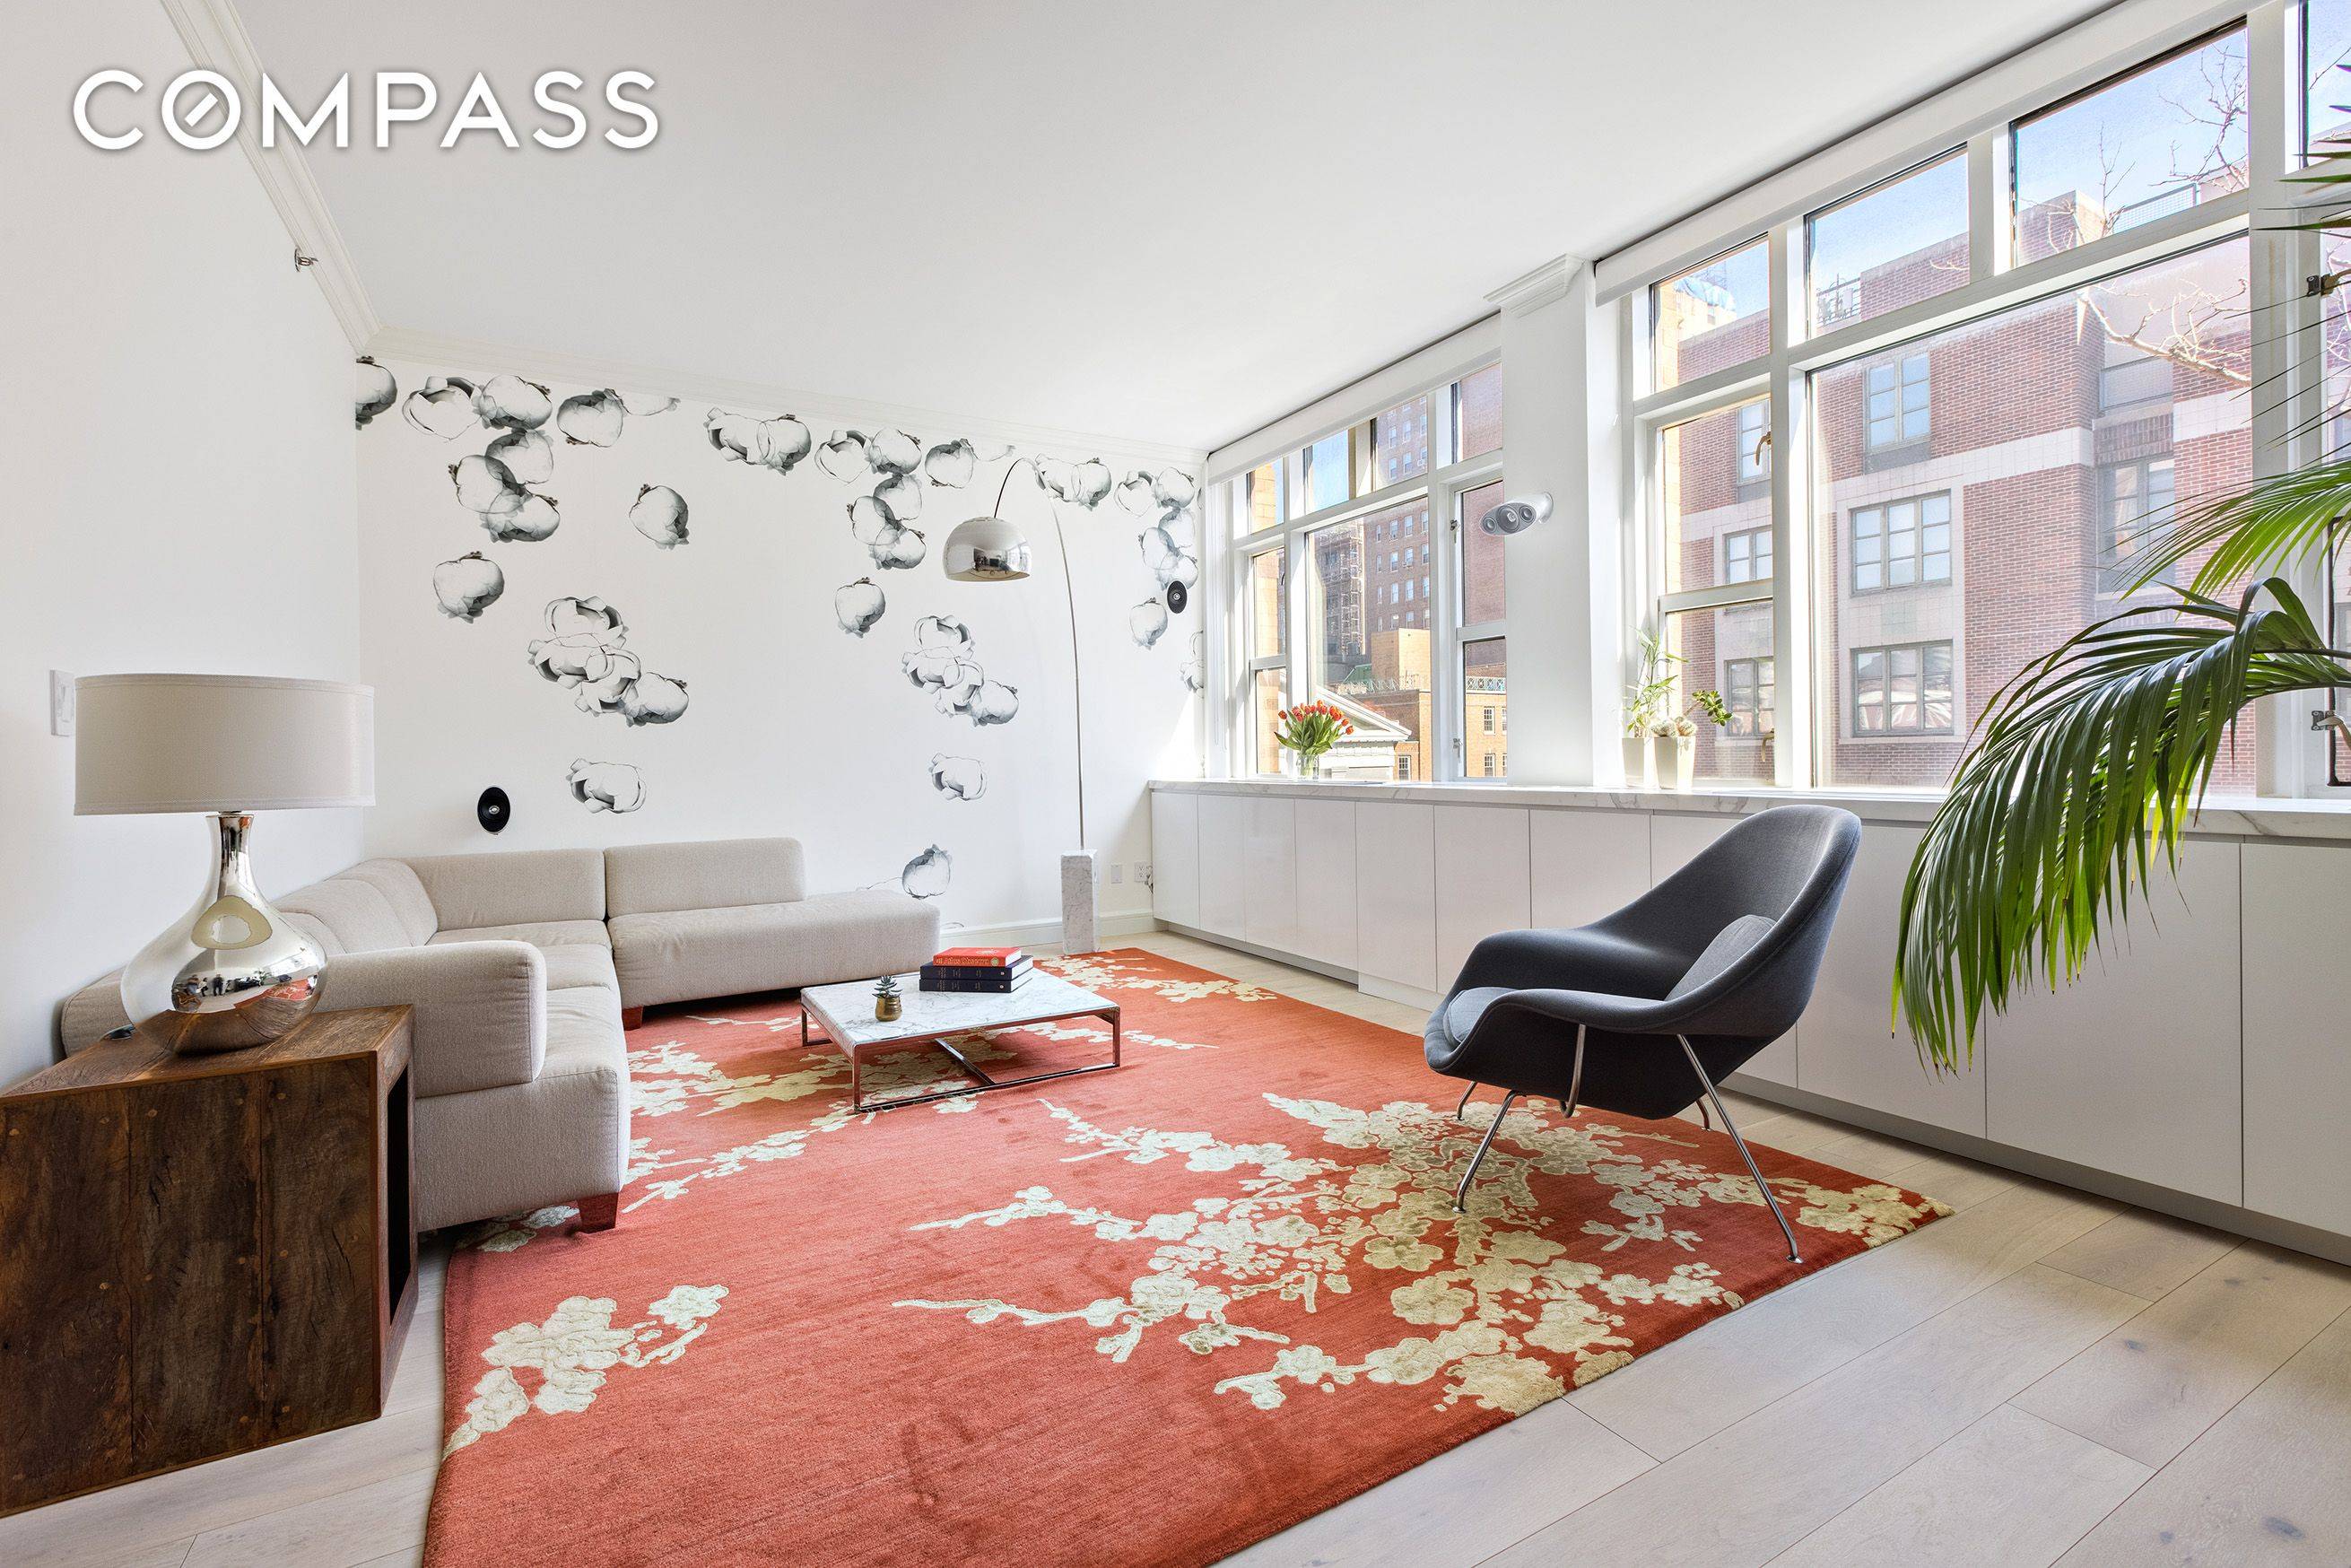 Welcome to this triple mint, high ceilinged and beautifully laid out condo residence at the nexus of Greenwich Village and West Village.